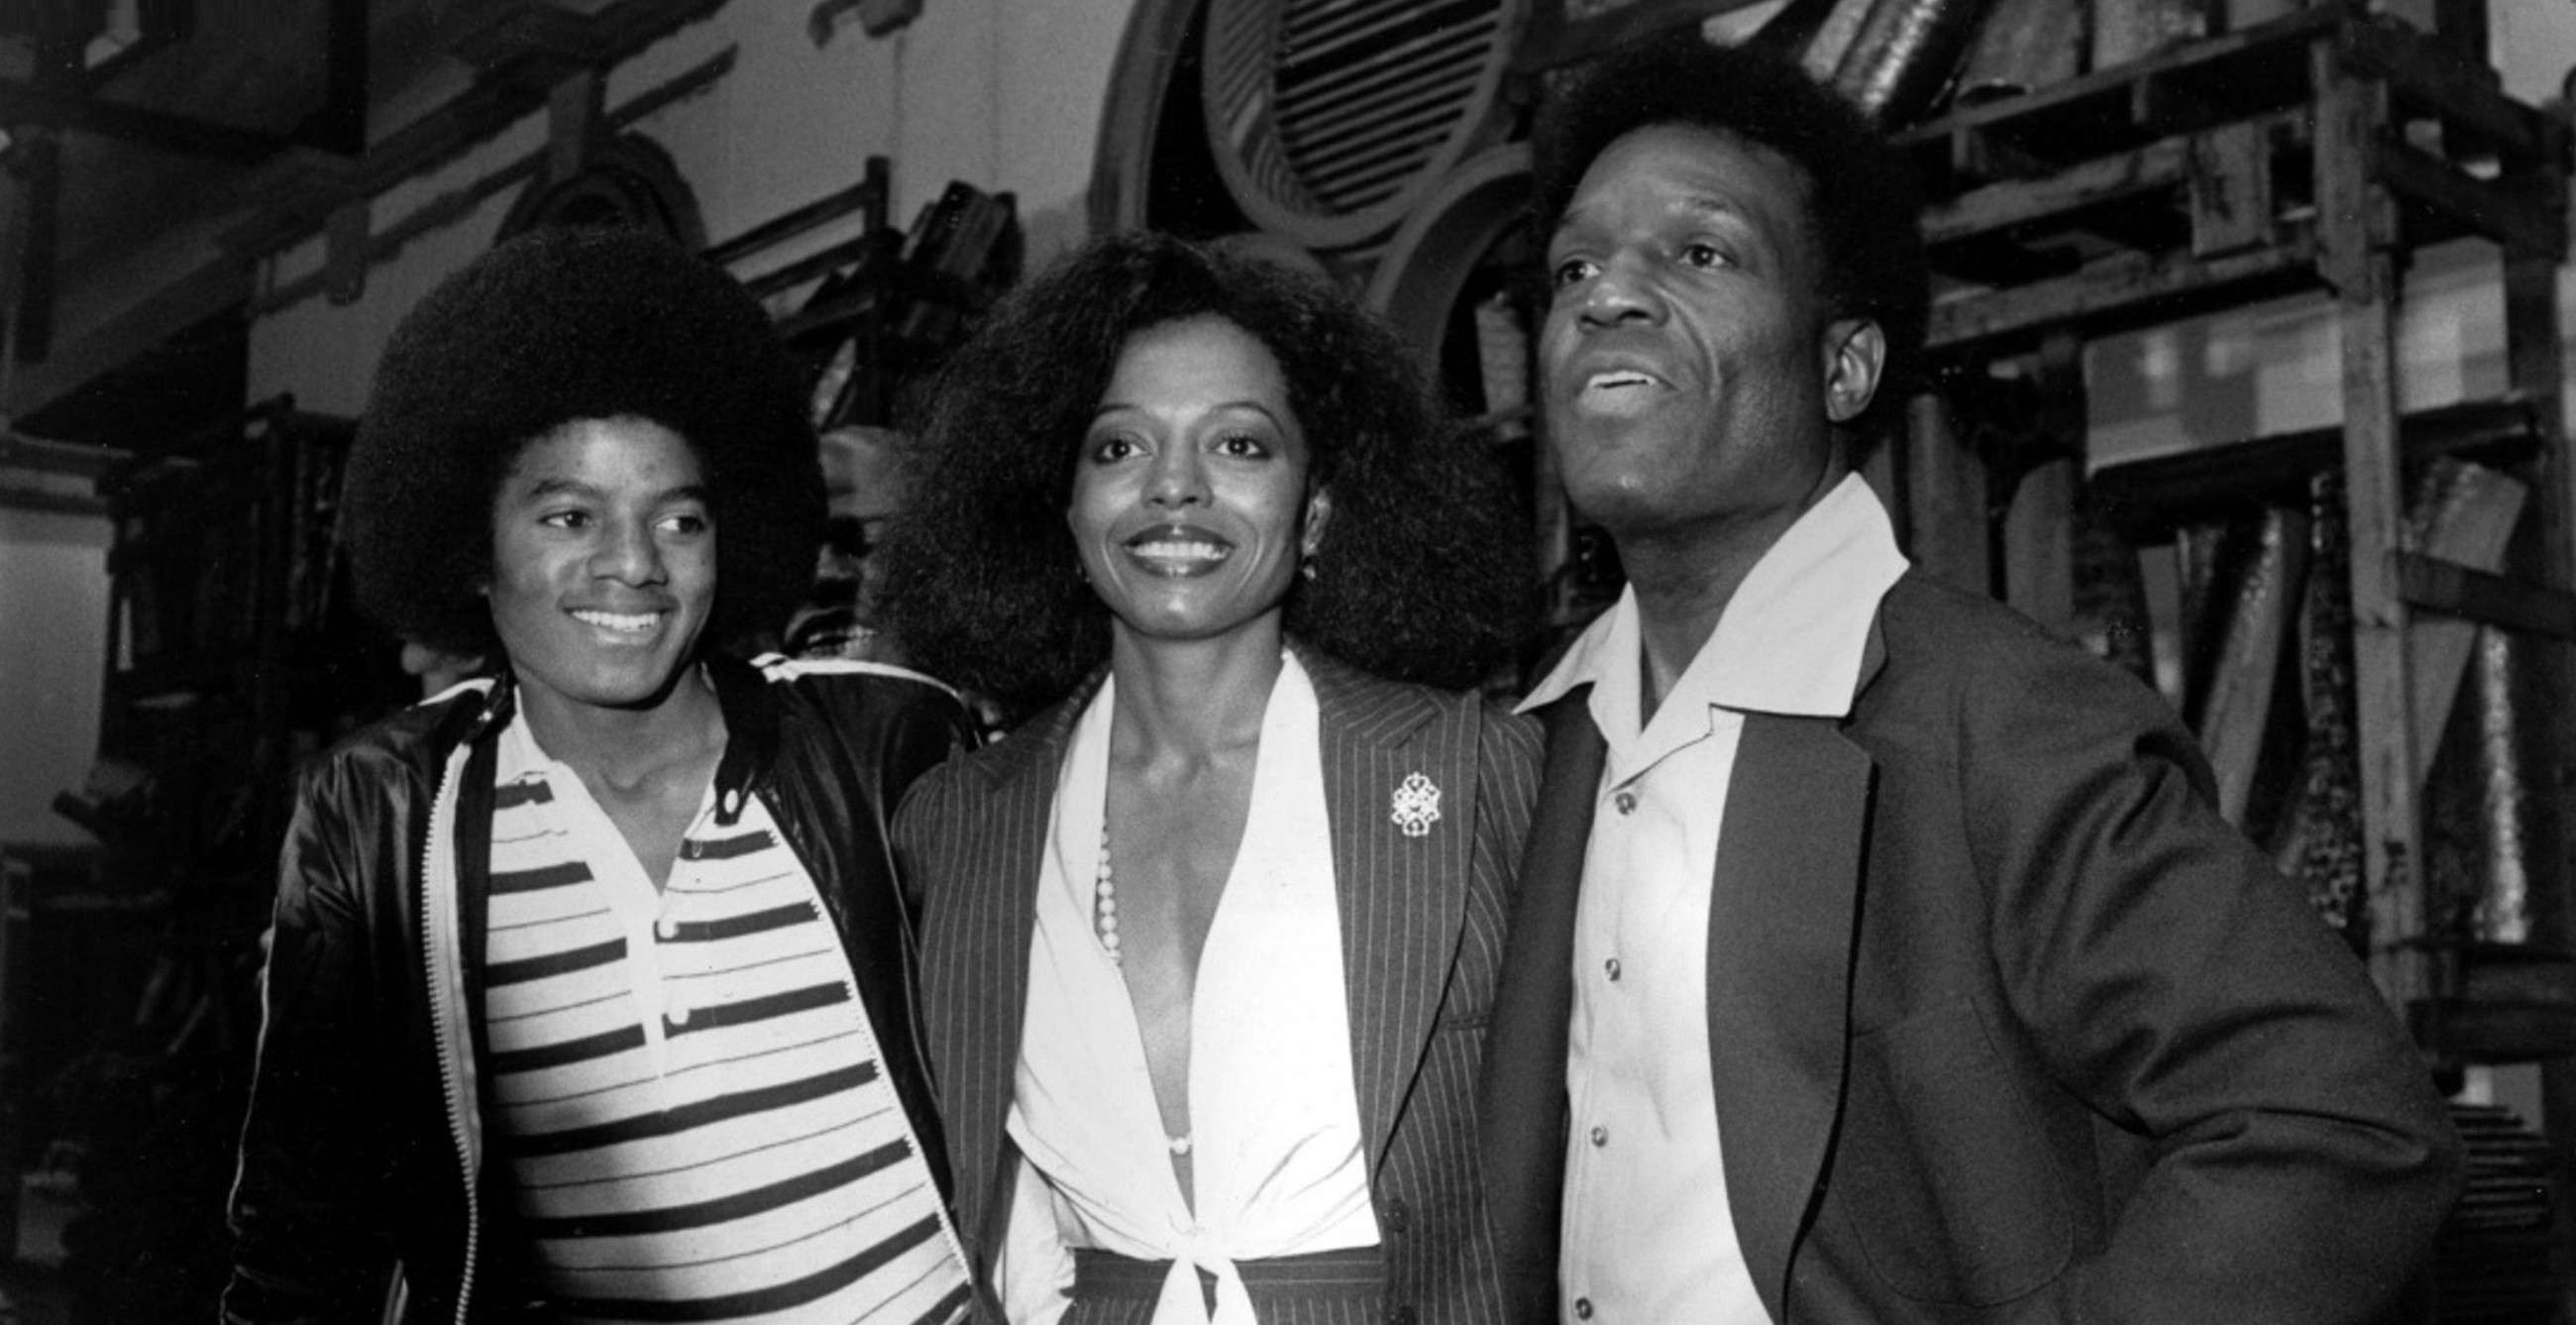 DIVULGAÇÃO - The Wiz - Michael Jackson and his The Wiz, Co-Also starring Diana Ross and Russell Nipsy attend a Press Conference for the premiere of the film. Michae42